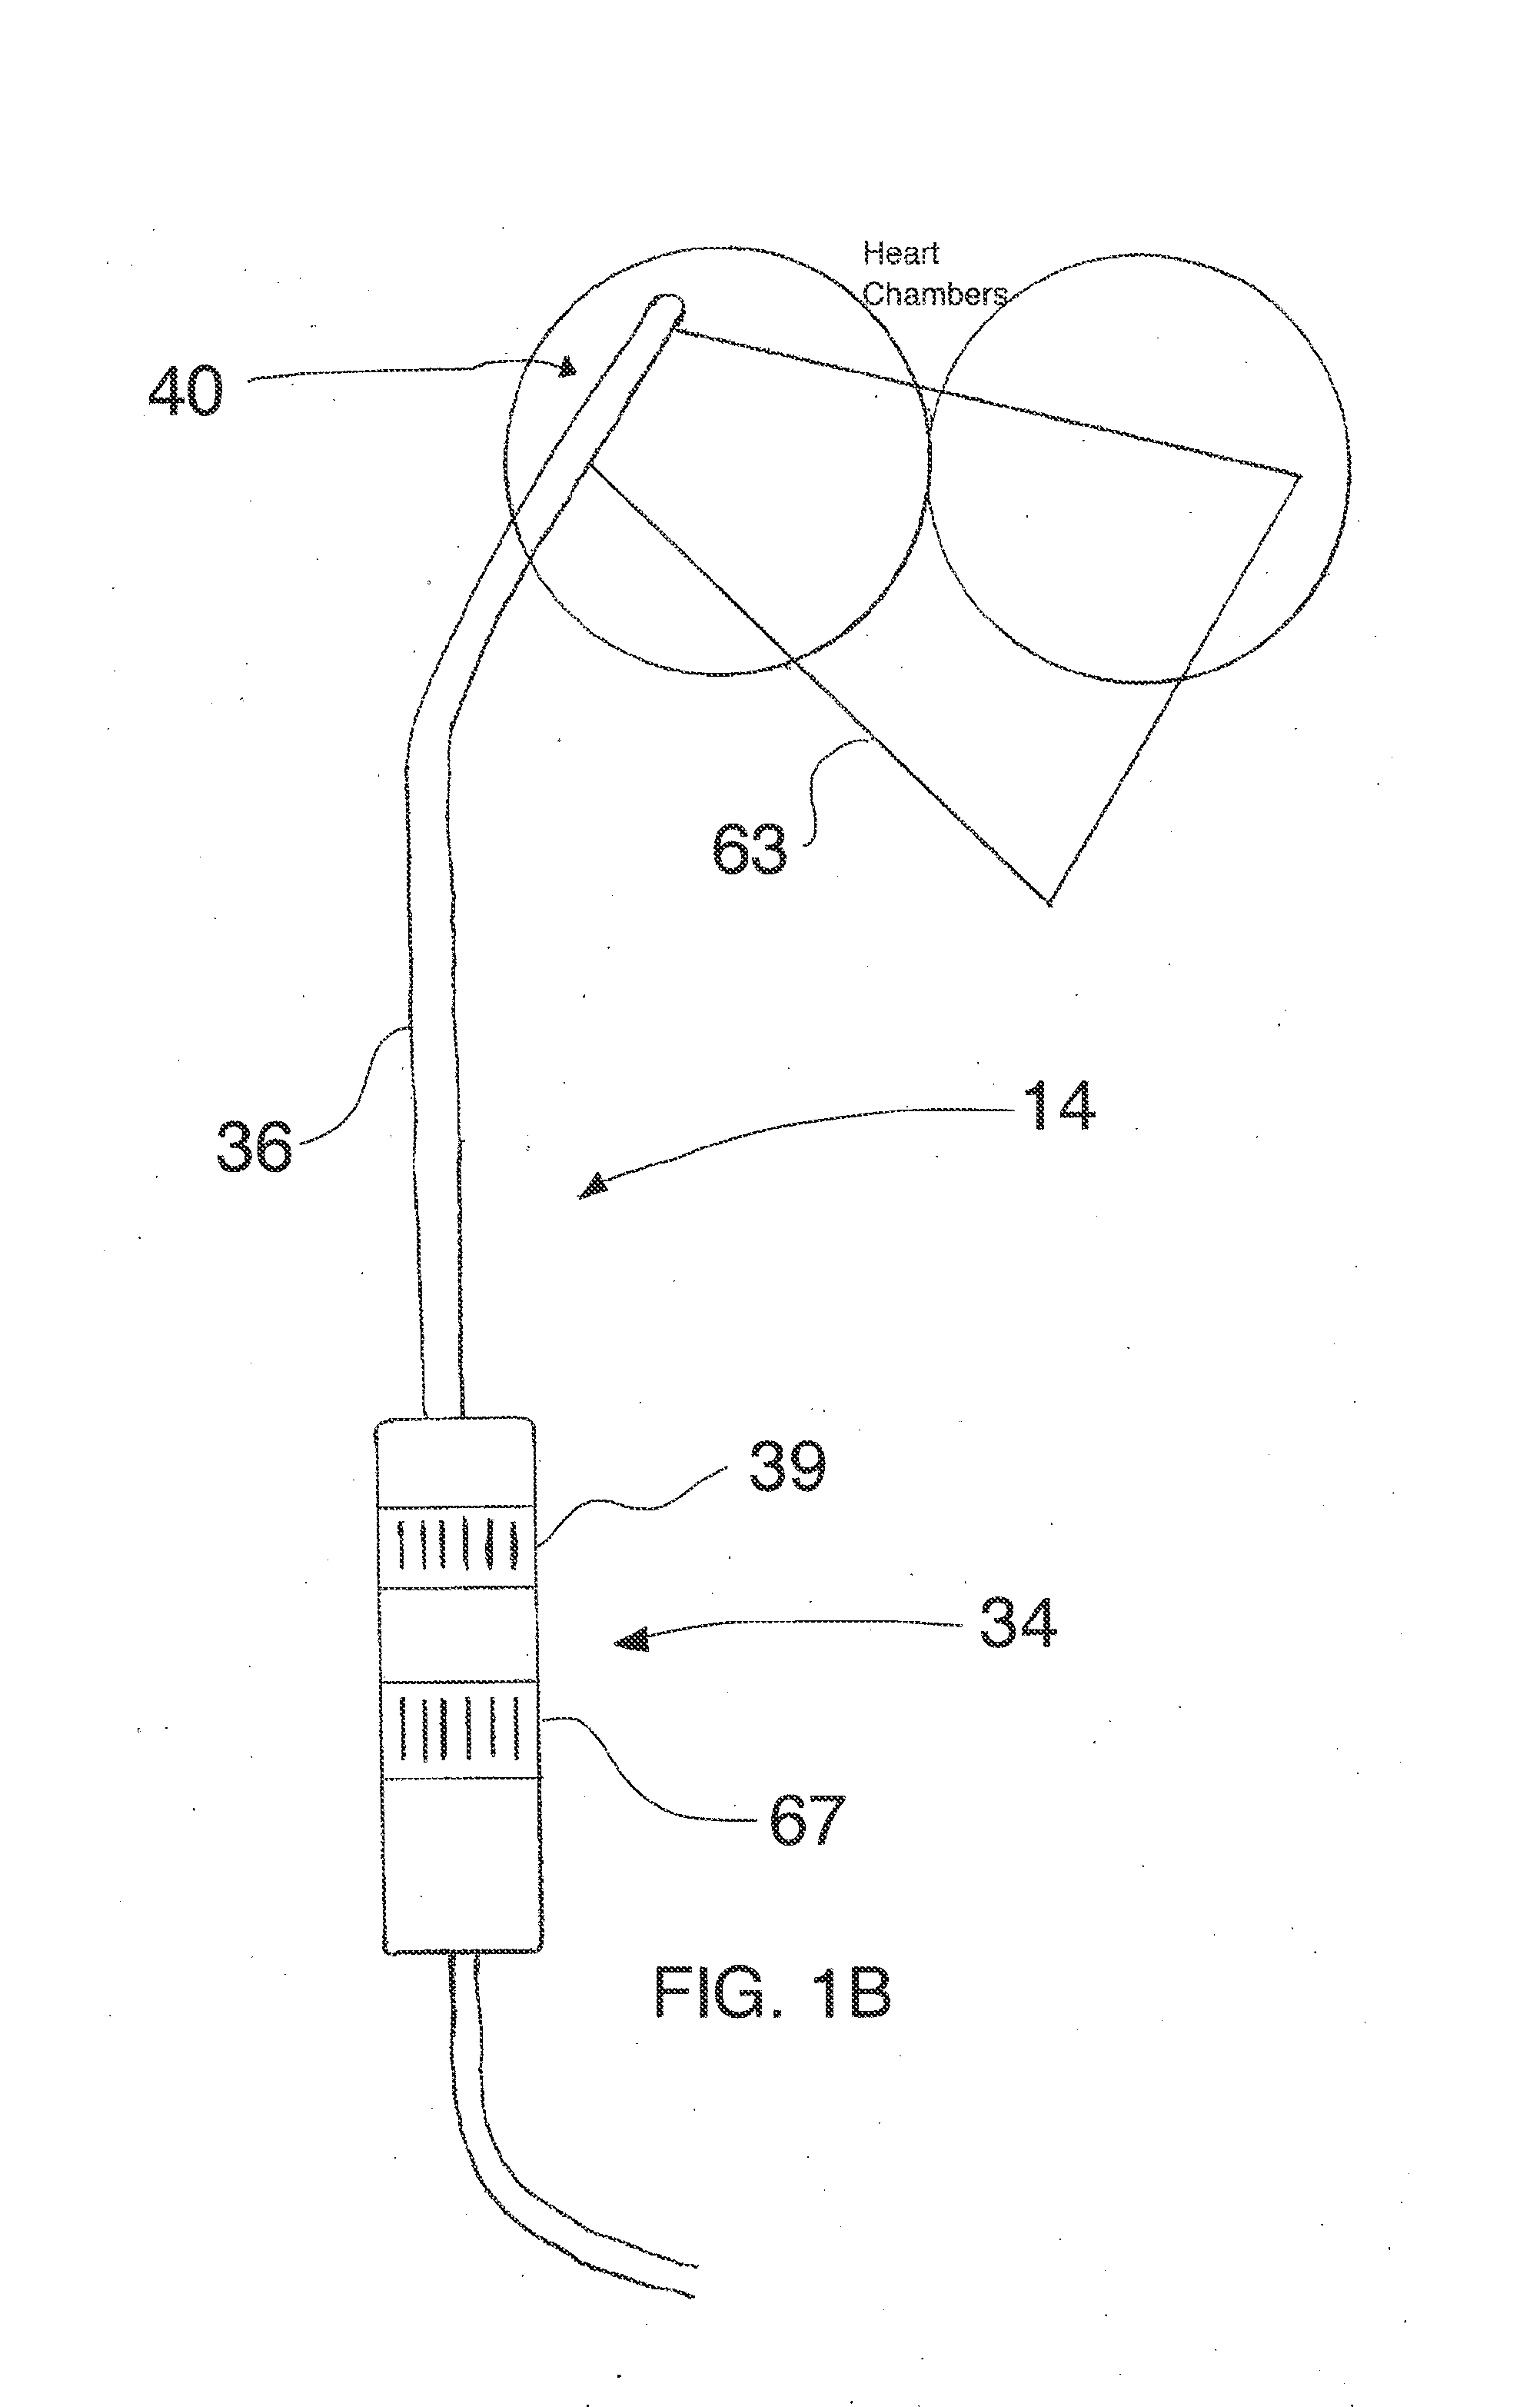 Device, system, and method for intracardiac diagnosis or therapy with localization